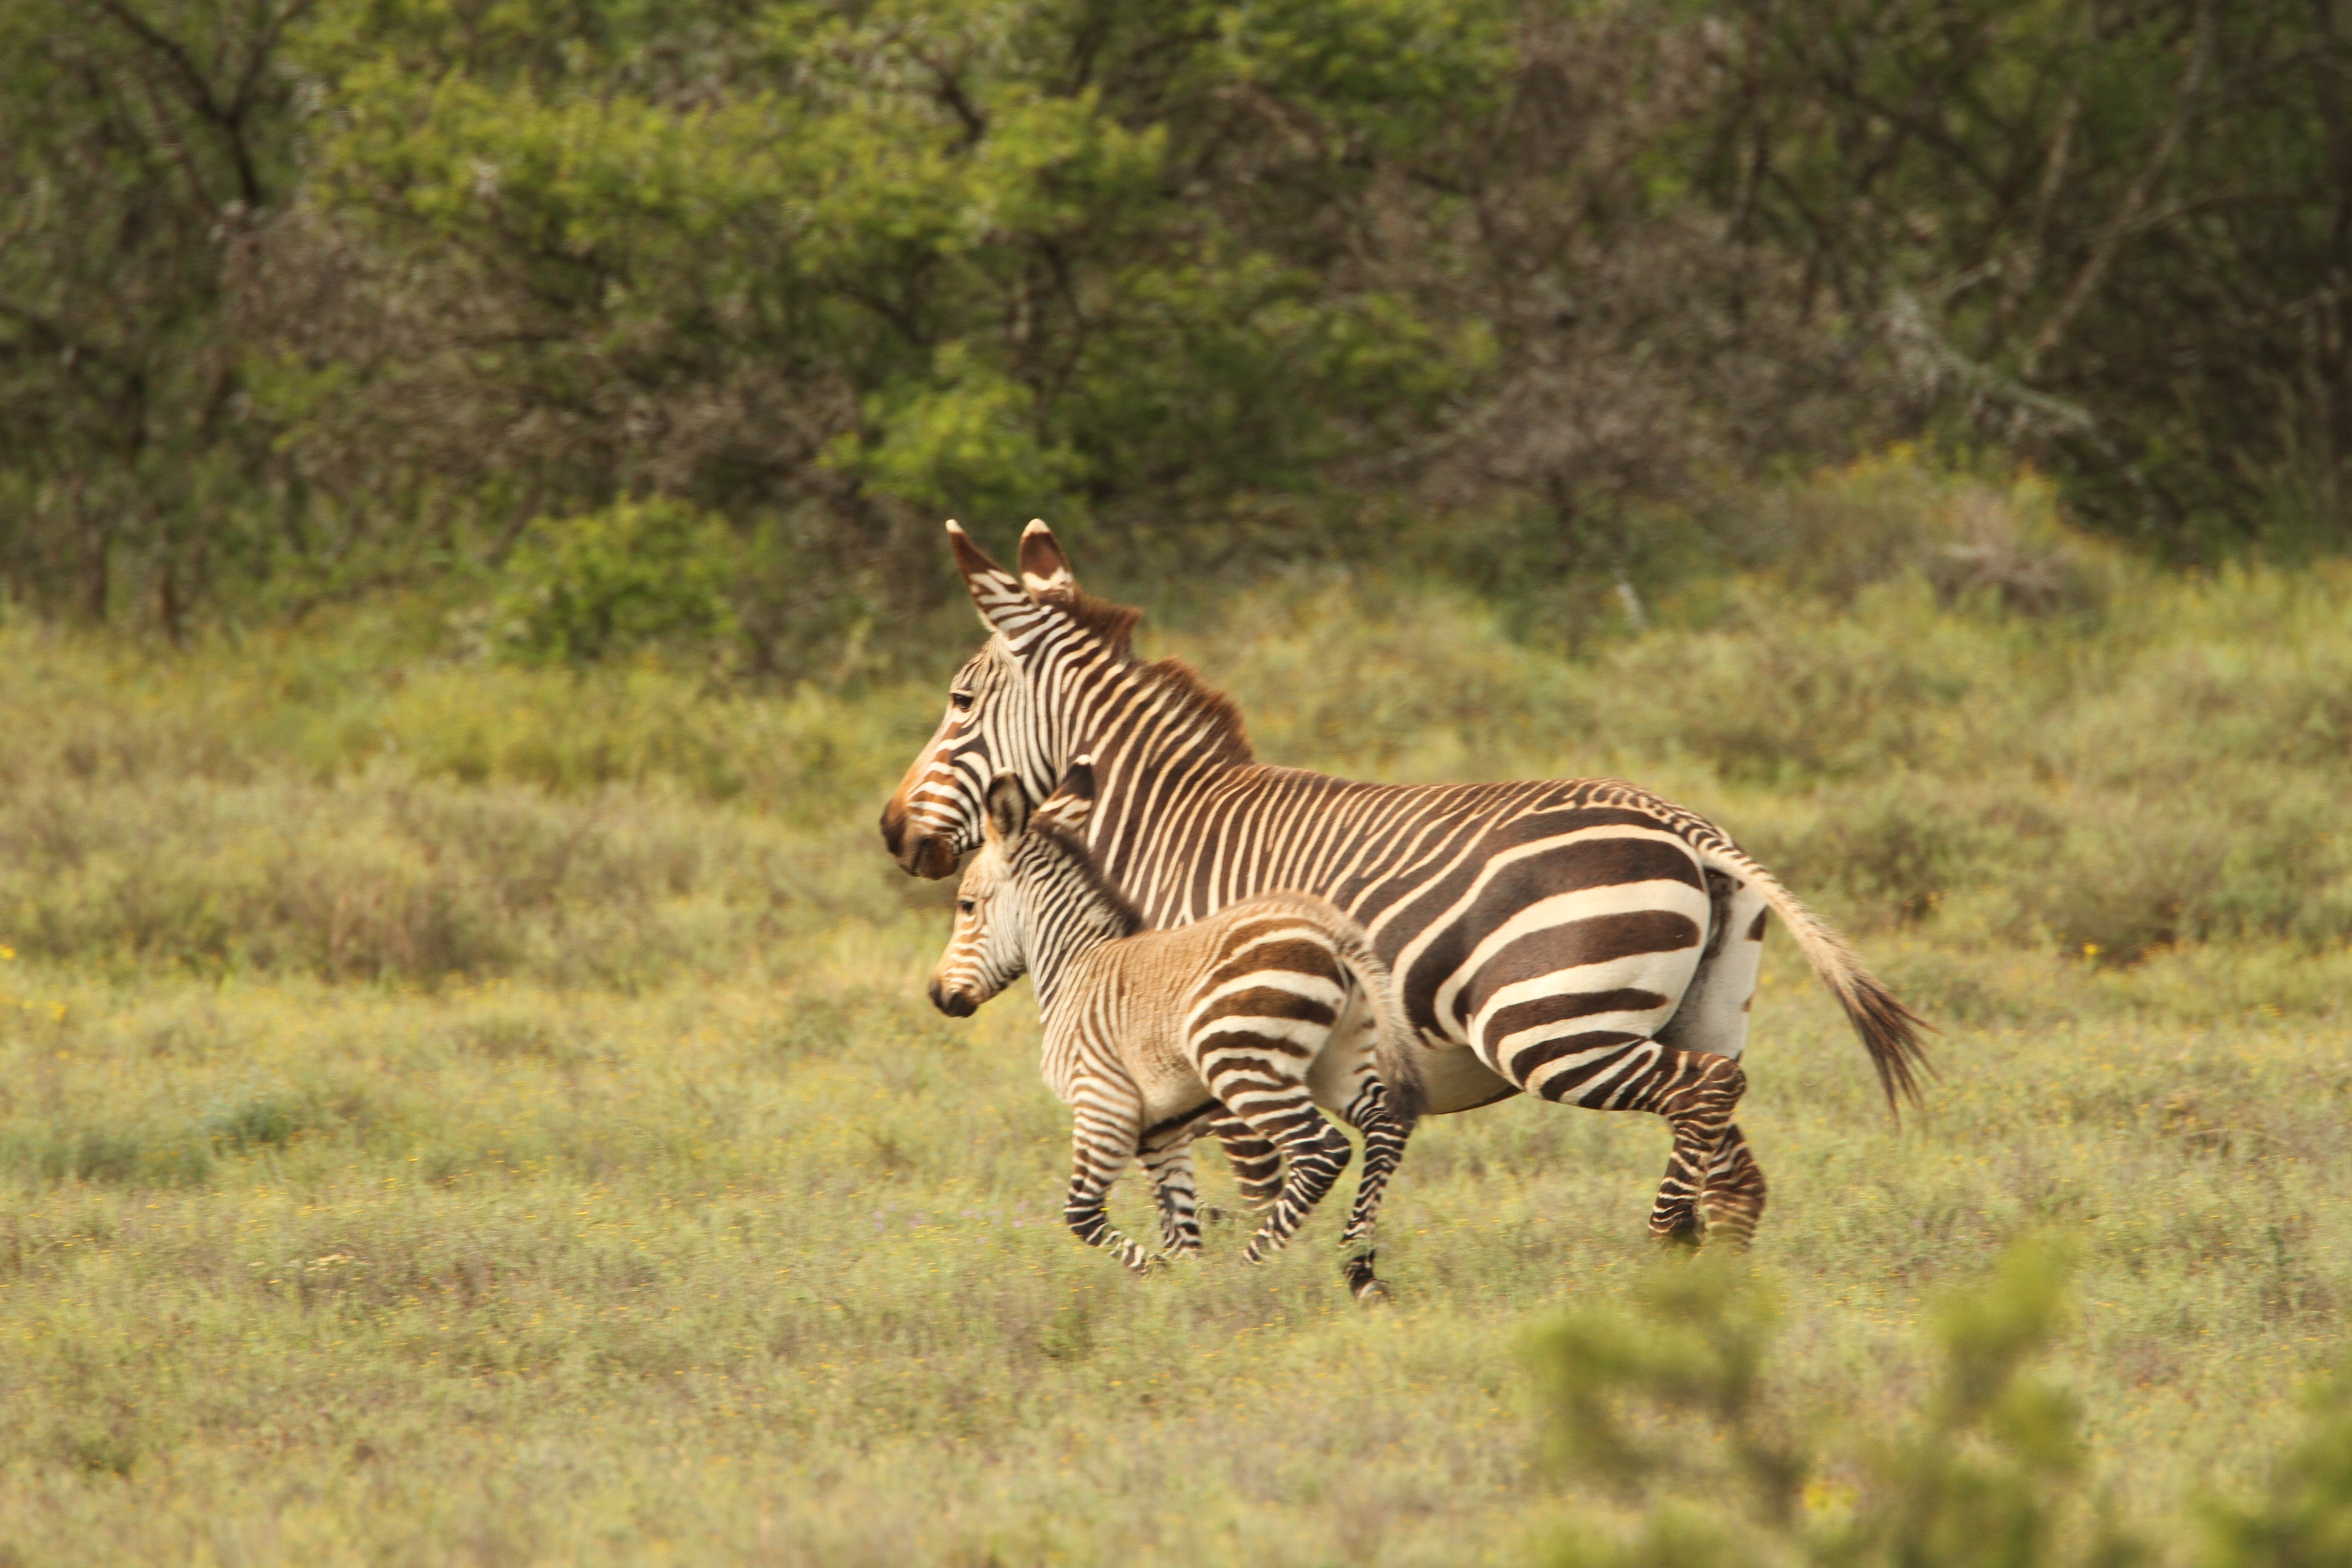 Zebras in the savannah of a africa free image download